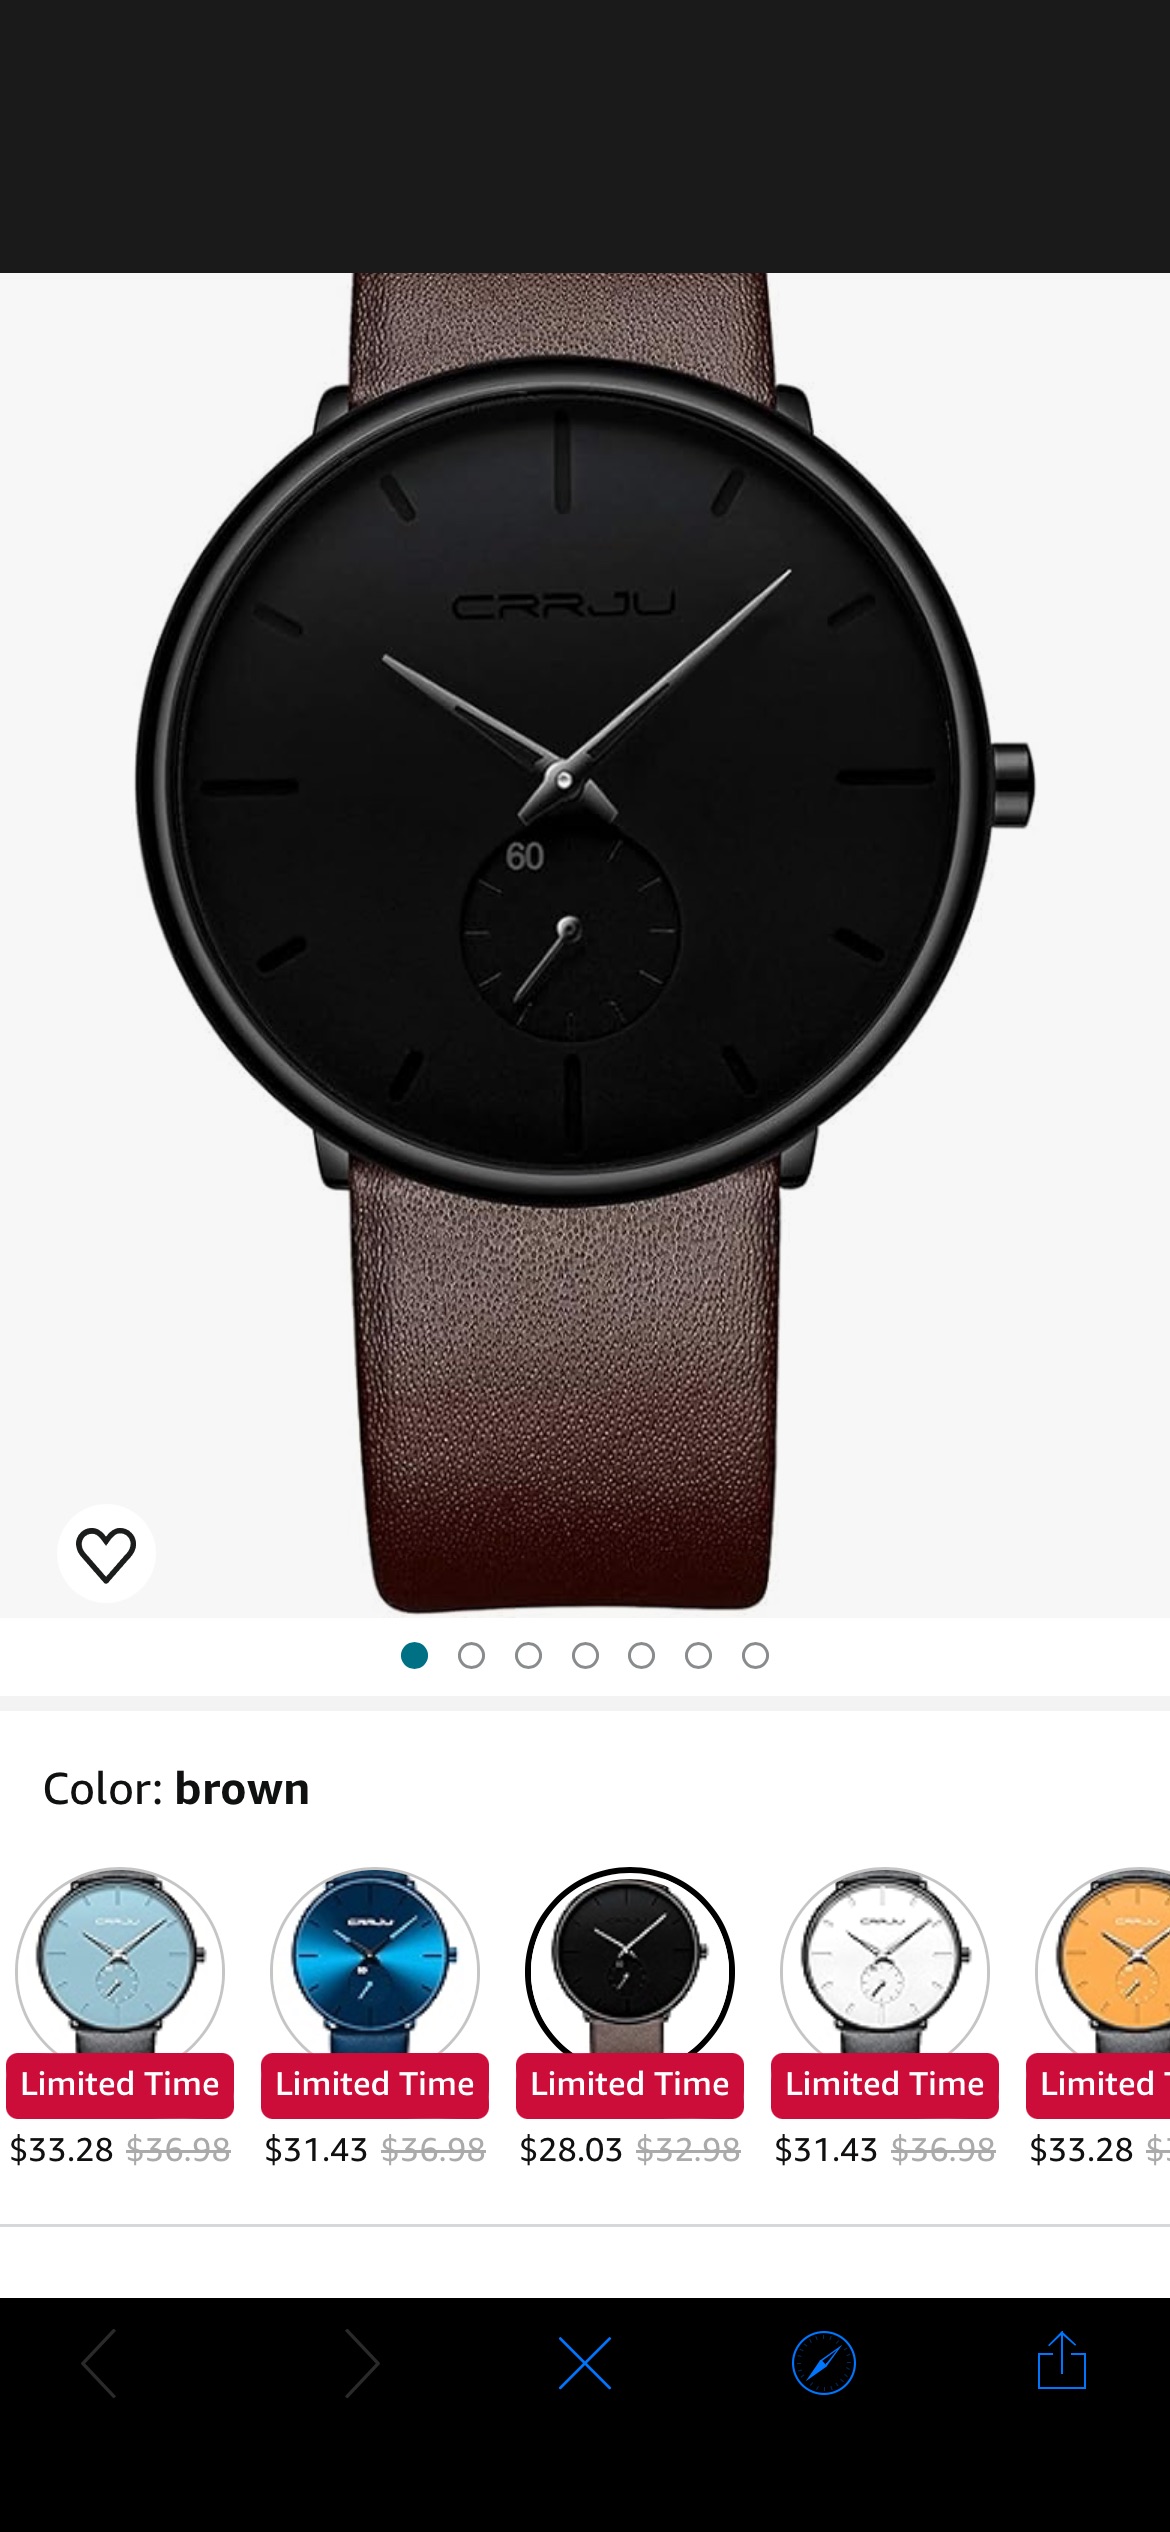 Amazon.com: Mens Watches Ultra-Thin Minimalist Waterproof-Fashion Wrist Watch for Men Unisex Dress with Leather Band-Black Hands （Brown Leather） : Clothing, Shoes & Jewelry